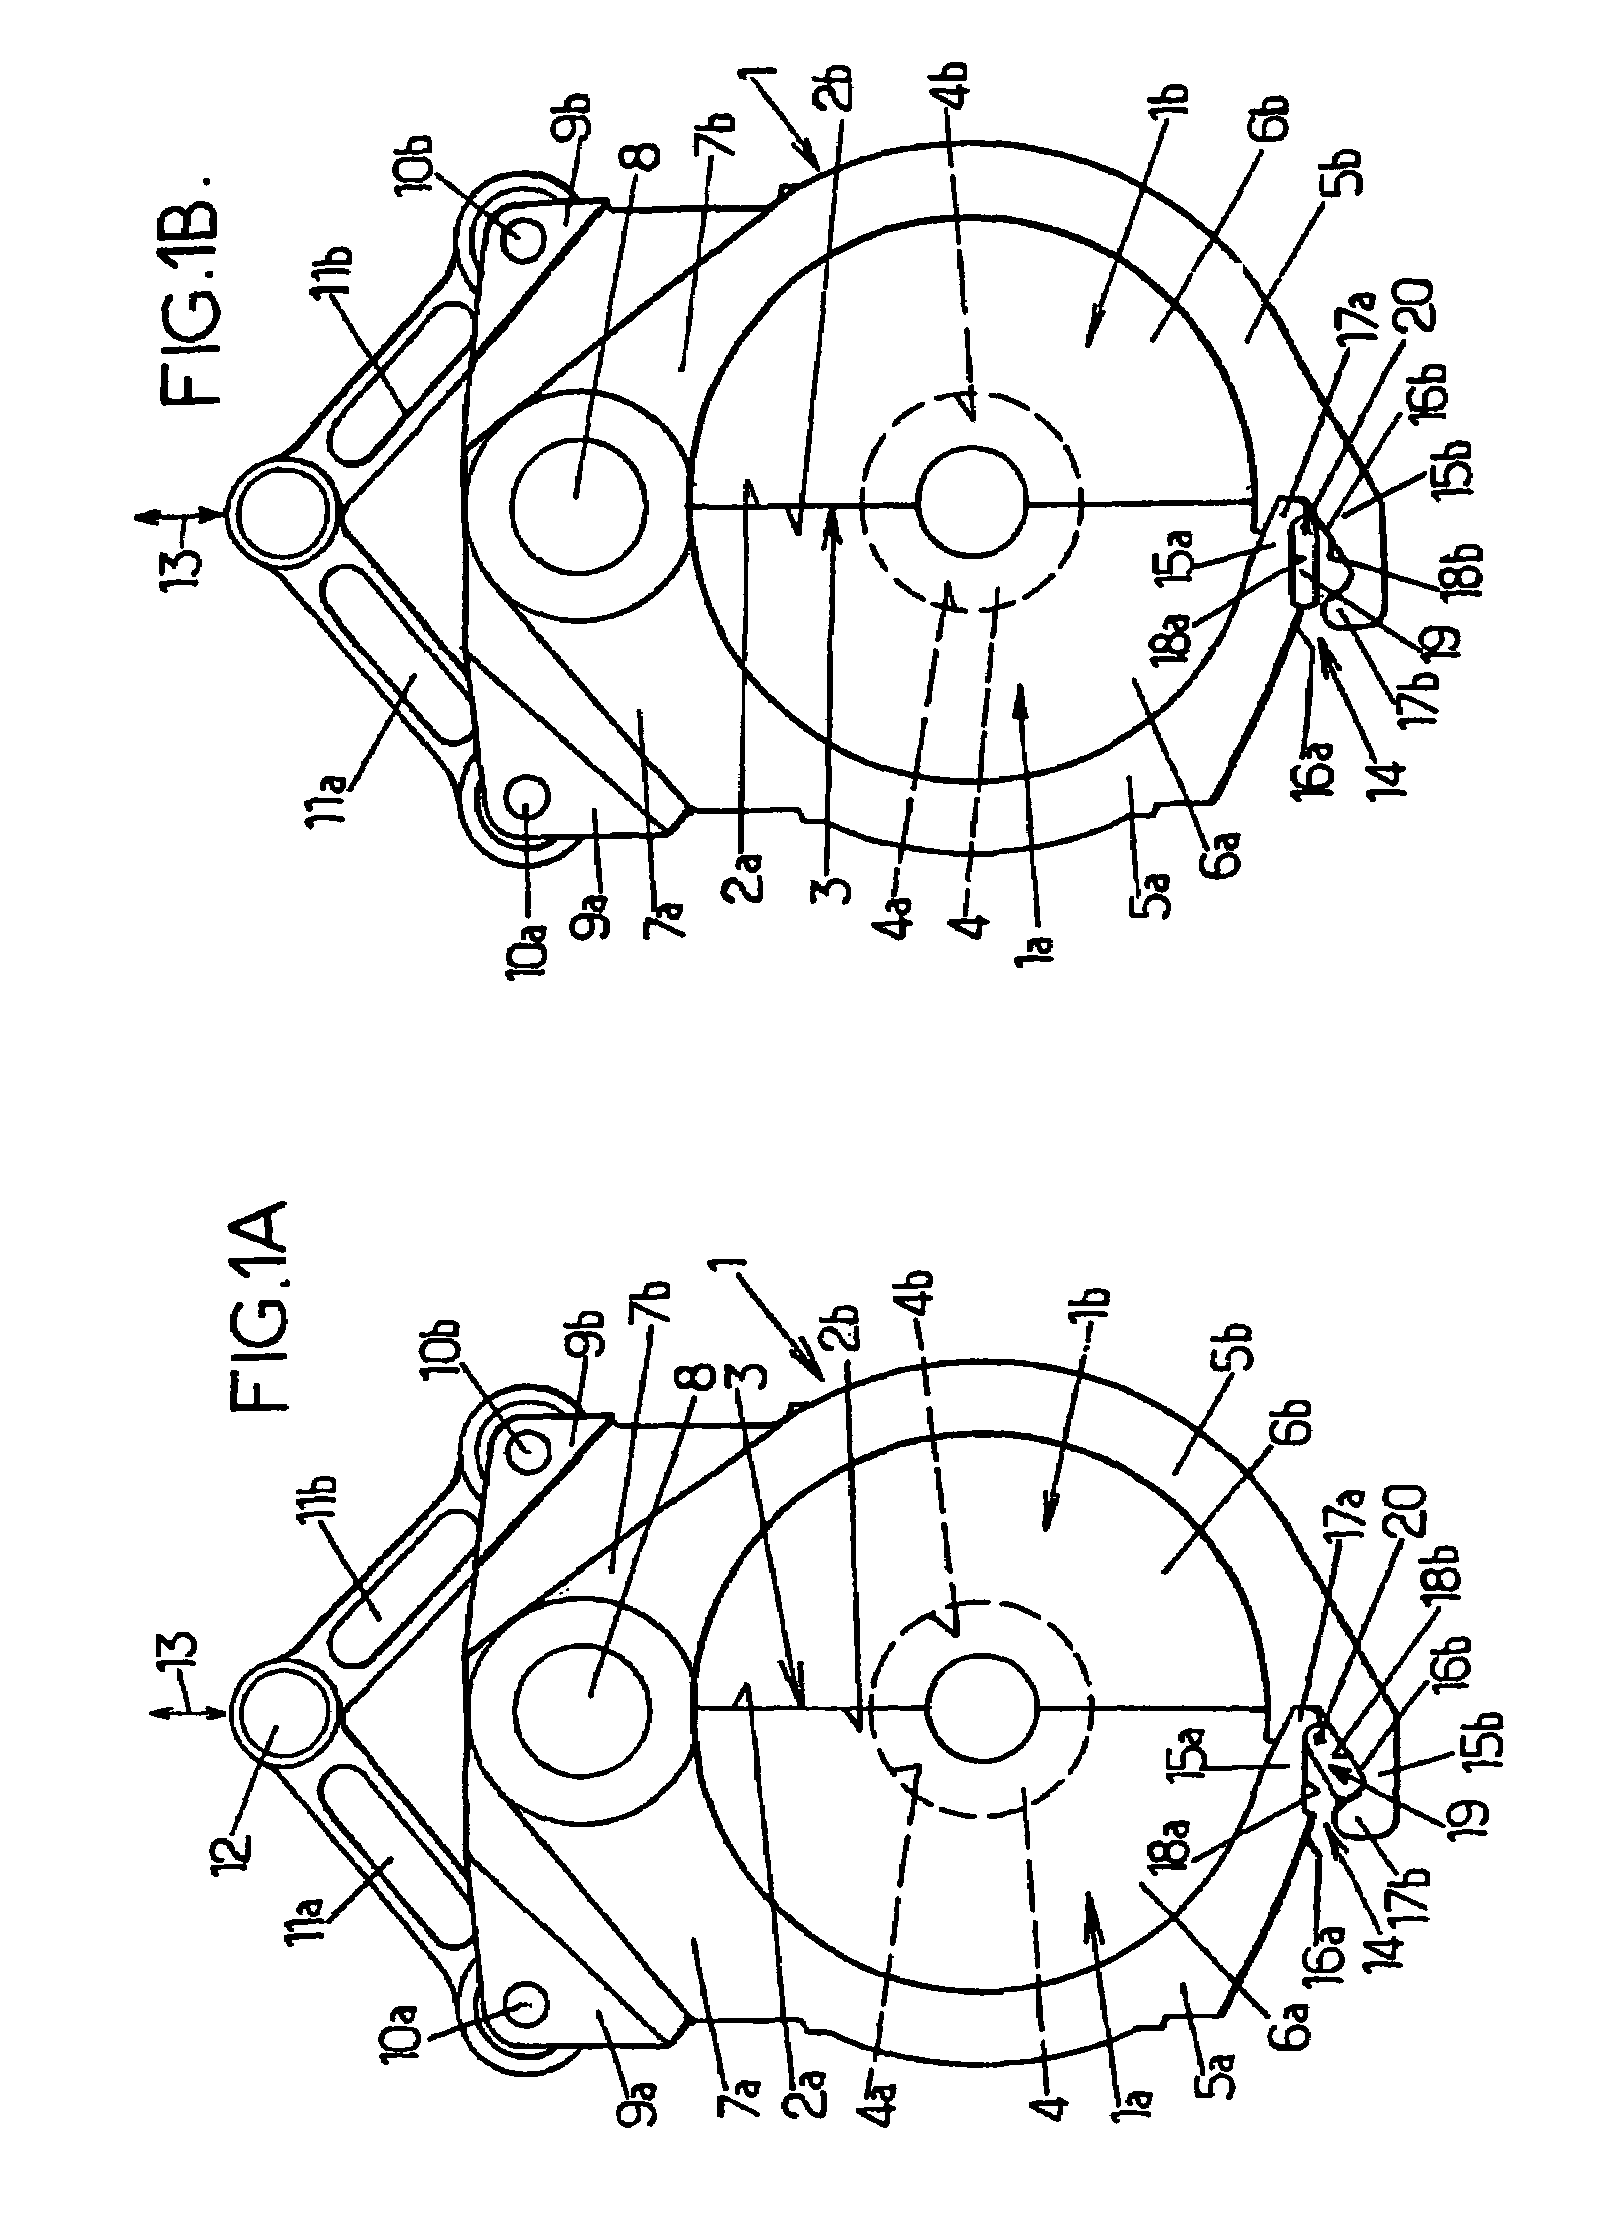 Molding device for producing thermoplastic containers